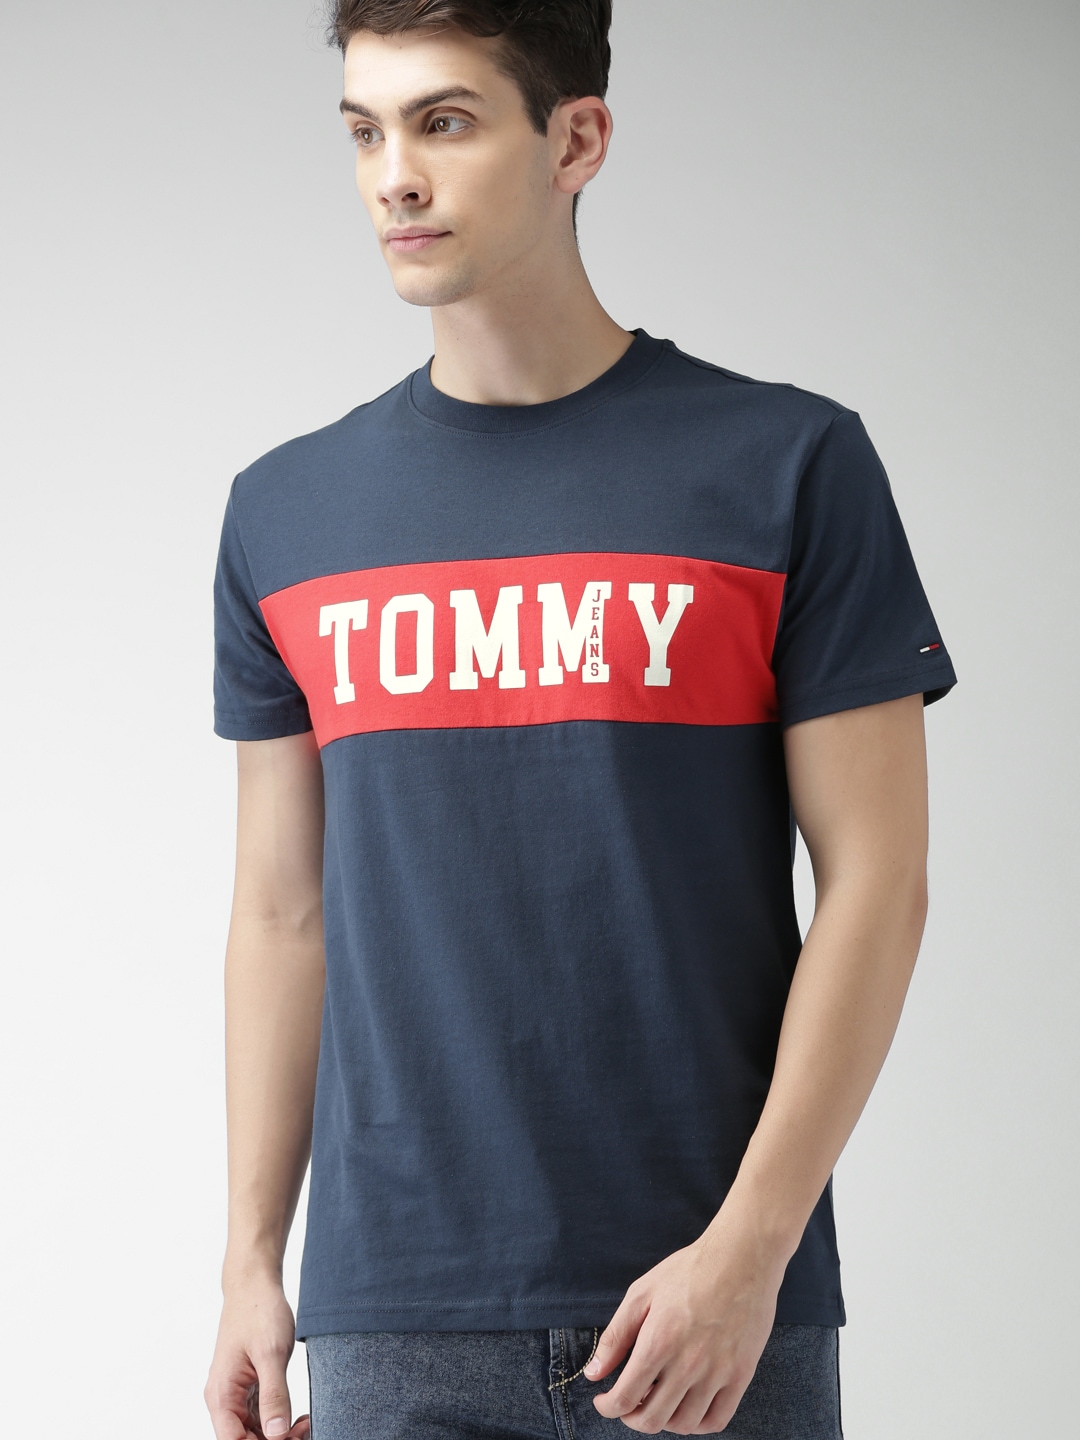 Tommy Hilfiger Navy Blue Printed Regular Fit Polo T Shirt for men price ...